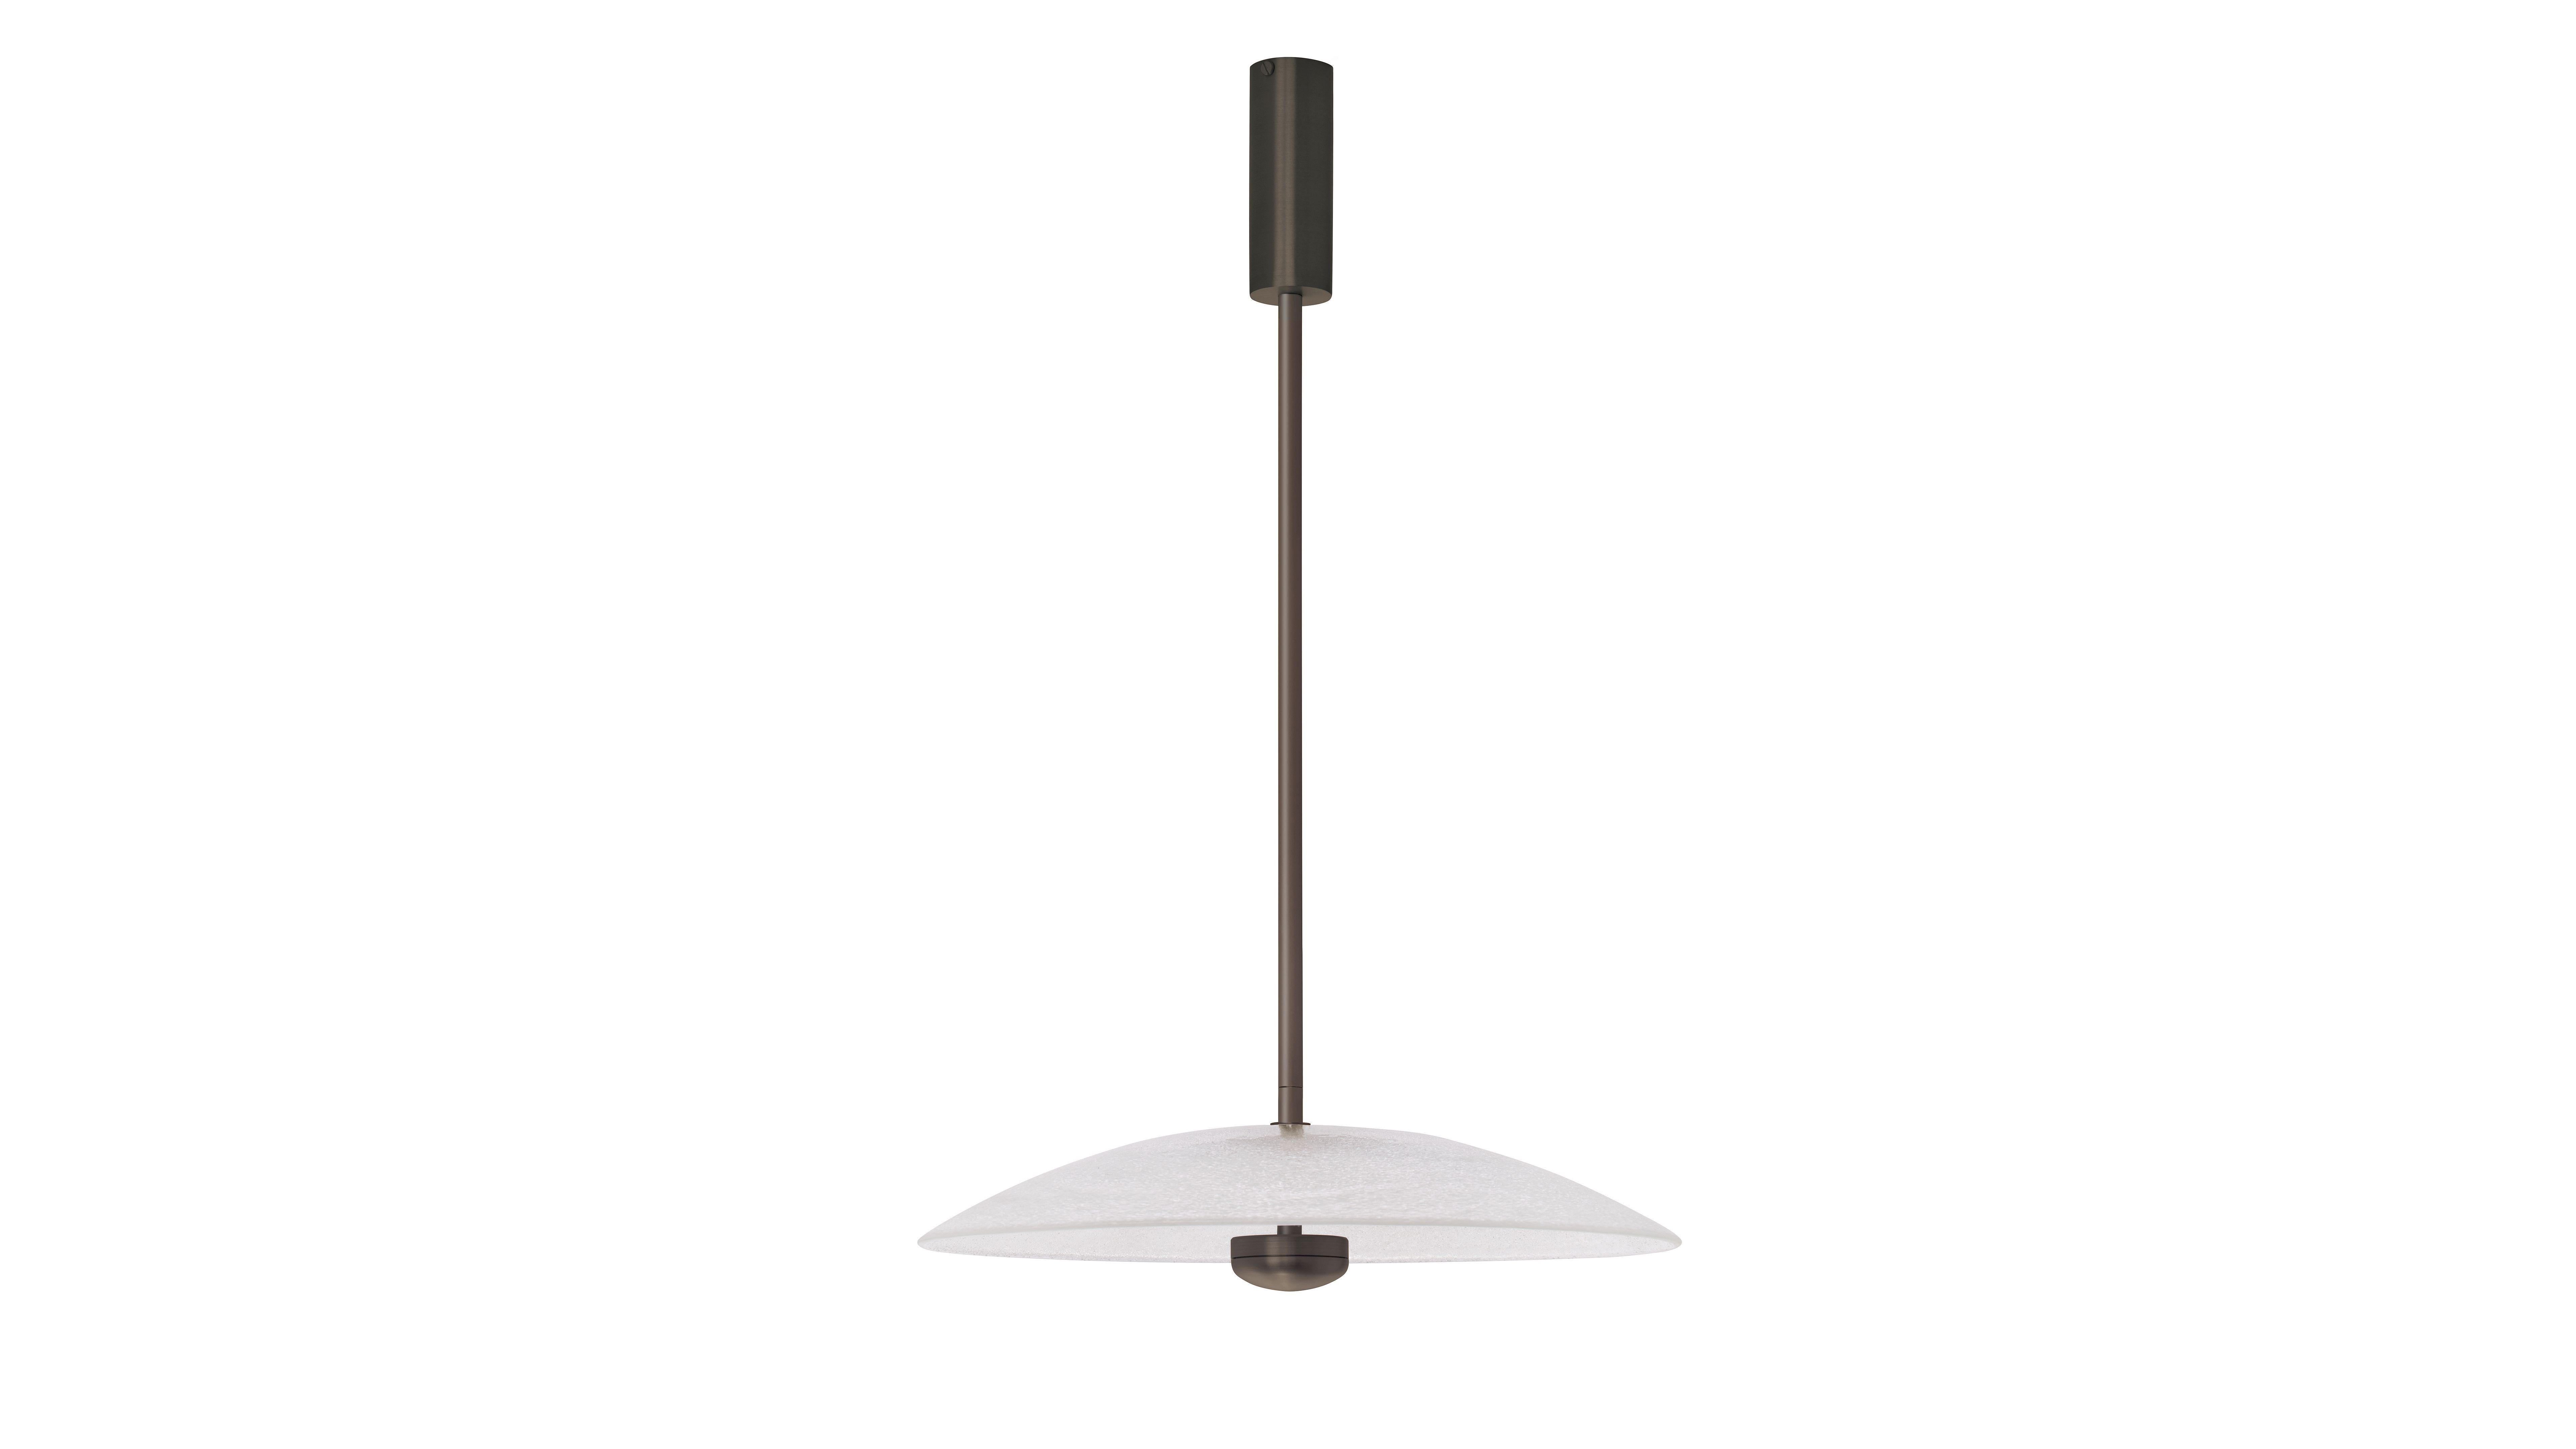 Bronze Cielo large pendant by CTO Lighting
Materials: Bronze with hand fritted glass
Dimensions: W 38.5 x D 38.5 x H 22.5 cm

integrated LED - trailing dimmable - 8w - 2700k
weight 4.5kg (9.9lbs)
supplied with 1000mm drop rod
for installation